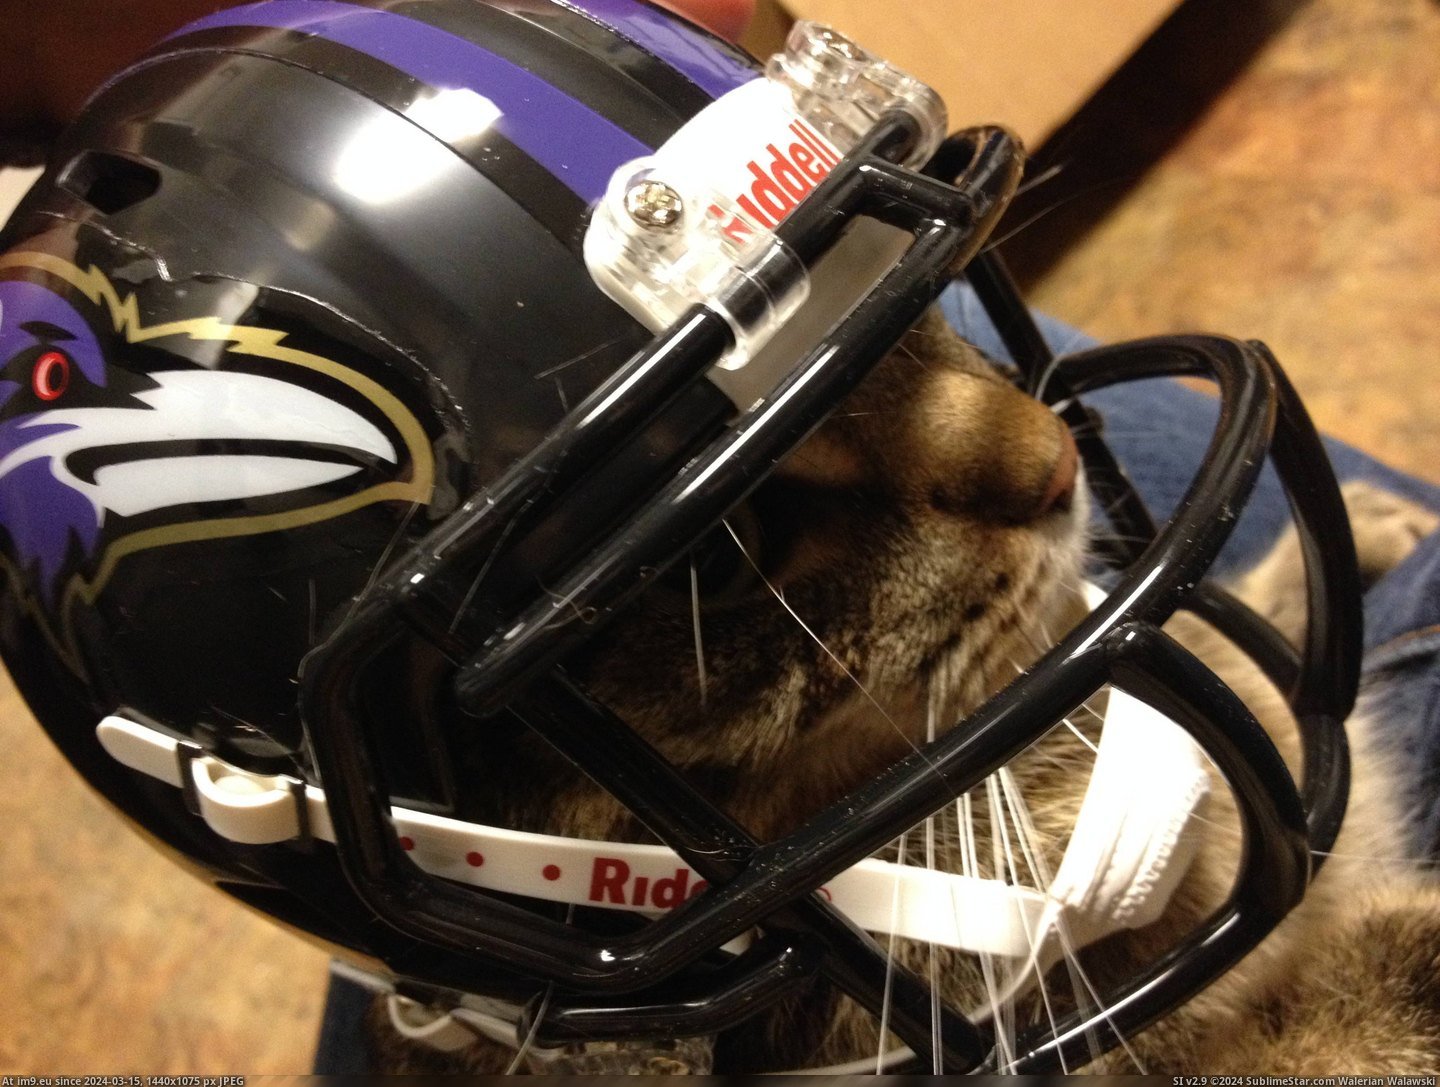 #Was #Tiny #Won #Obvious #Raffle #Football #Step #Helmet [Aww] Won a tiny football helmet in a raffle. This was the obvious next step. Pic. (Изображение из альбом My r/AWW favs))